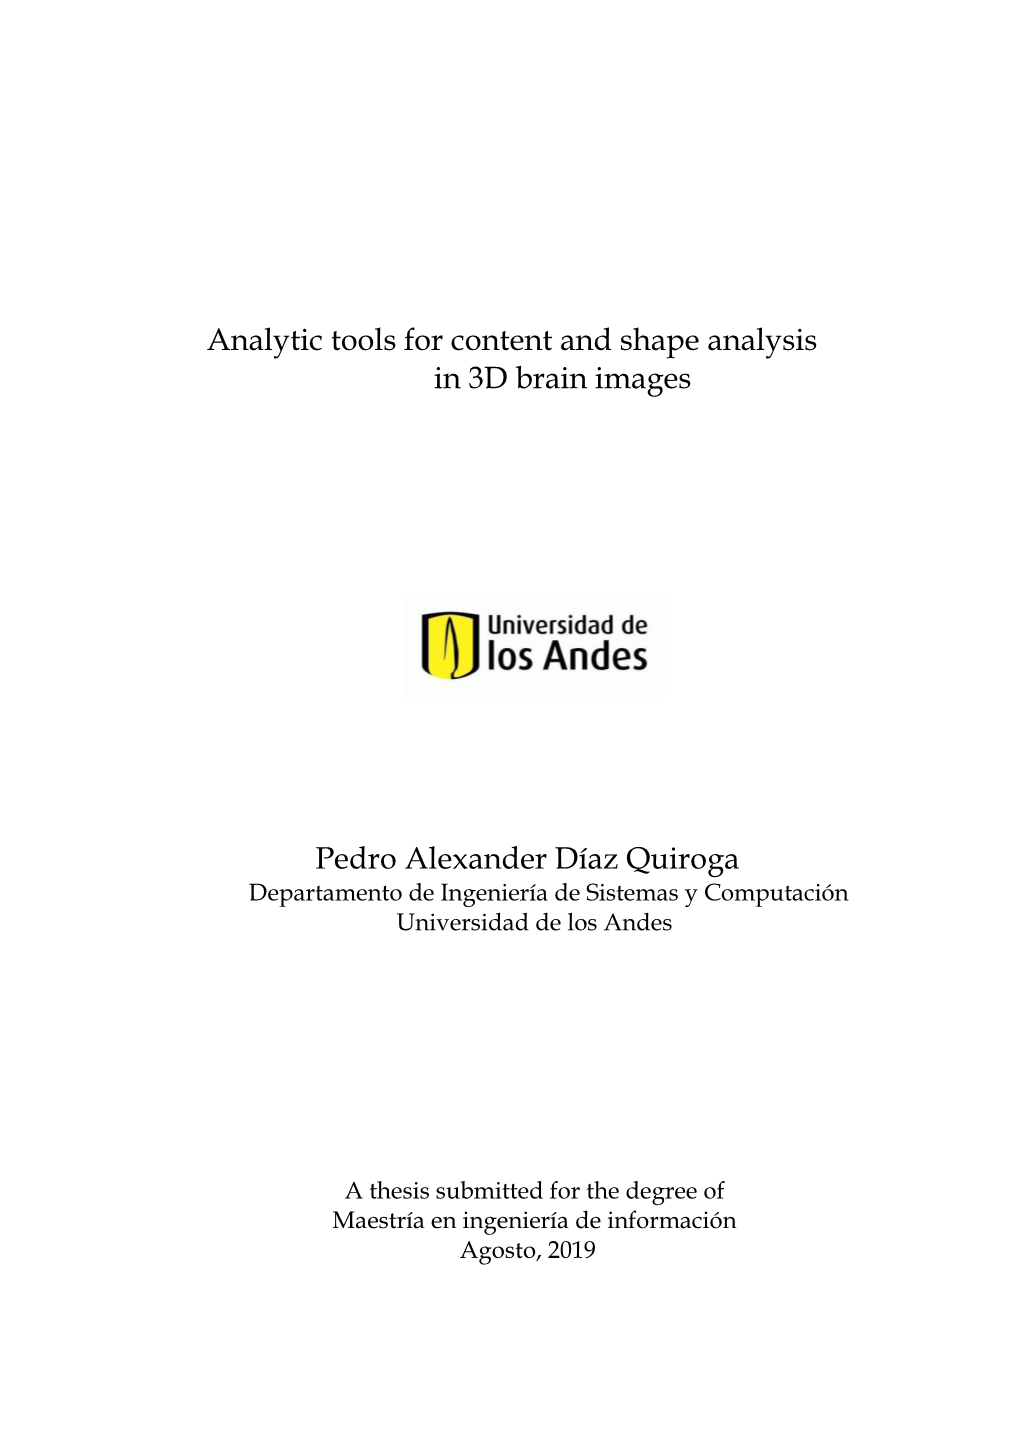 Analytic Tools for Content and Shape Analysis in 3D Brain Images Pedro